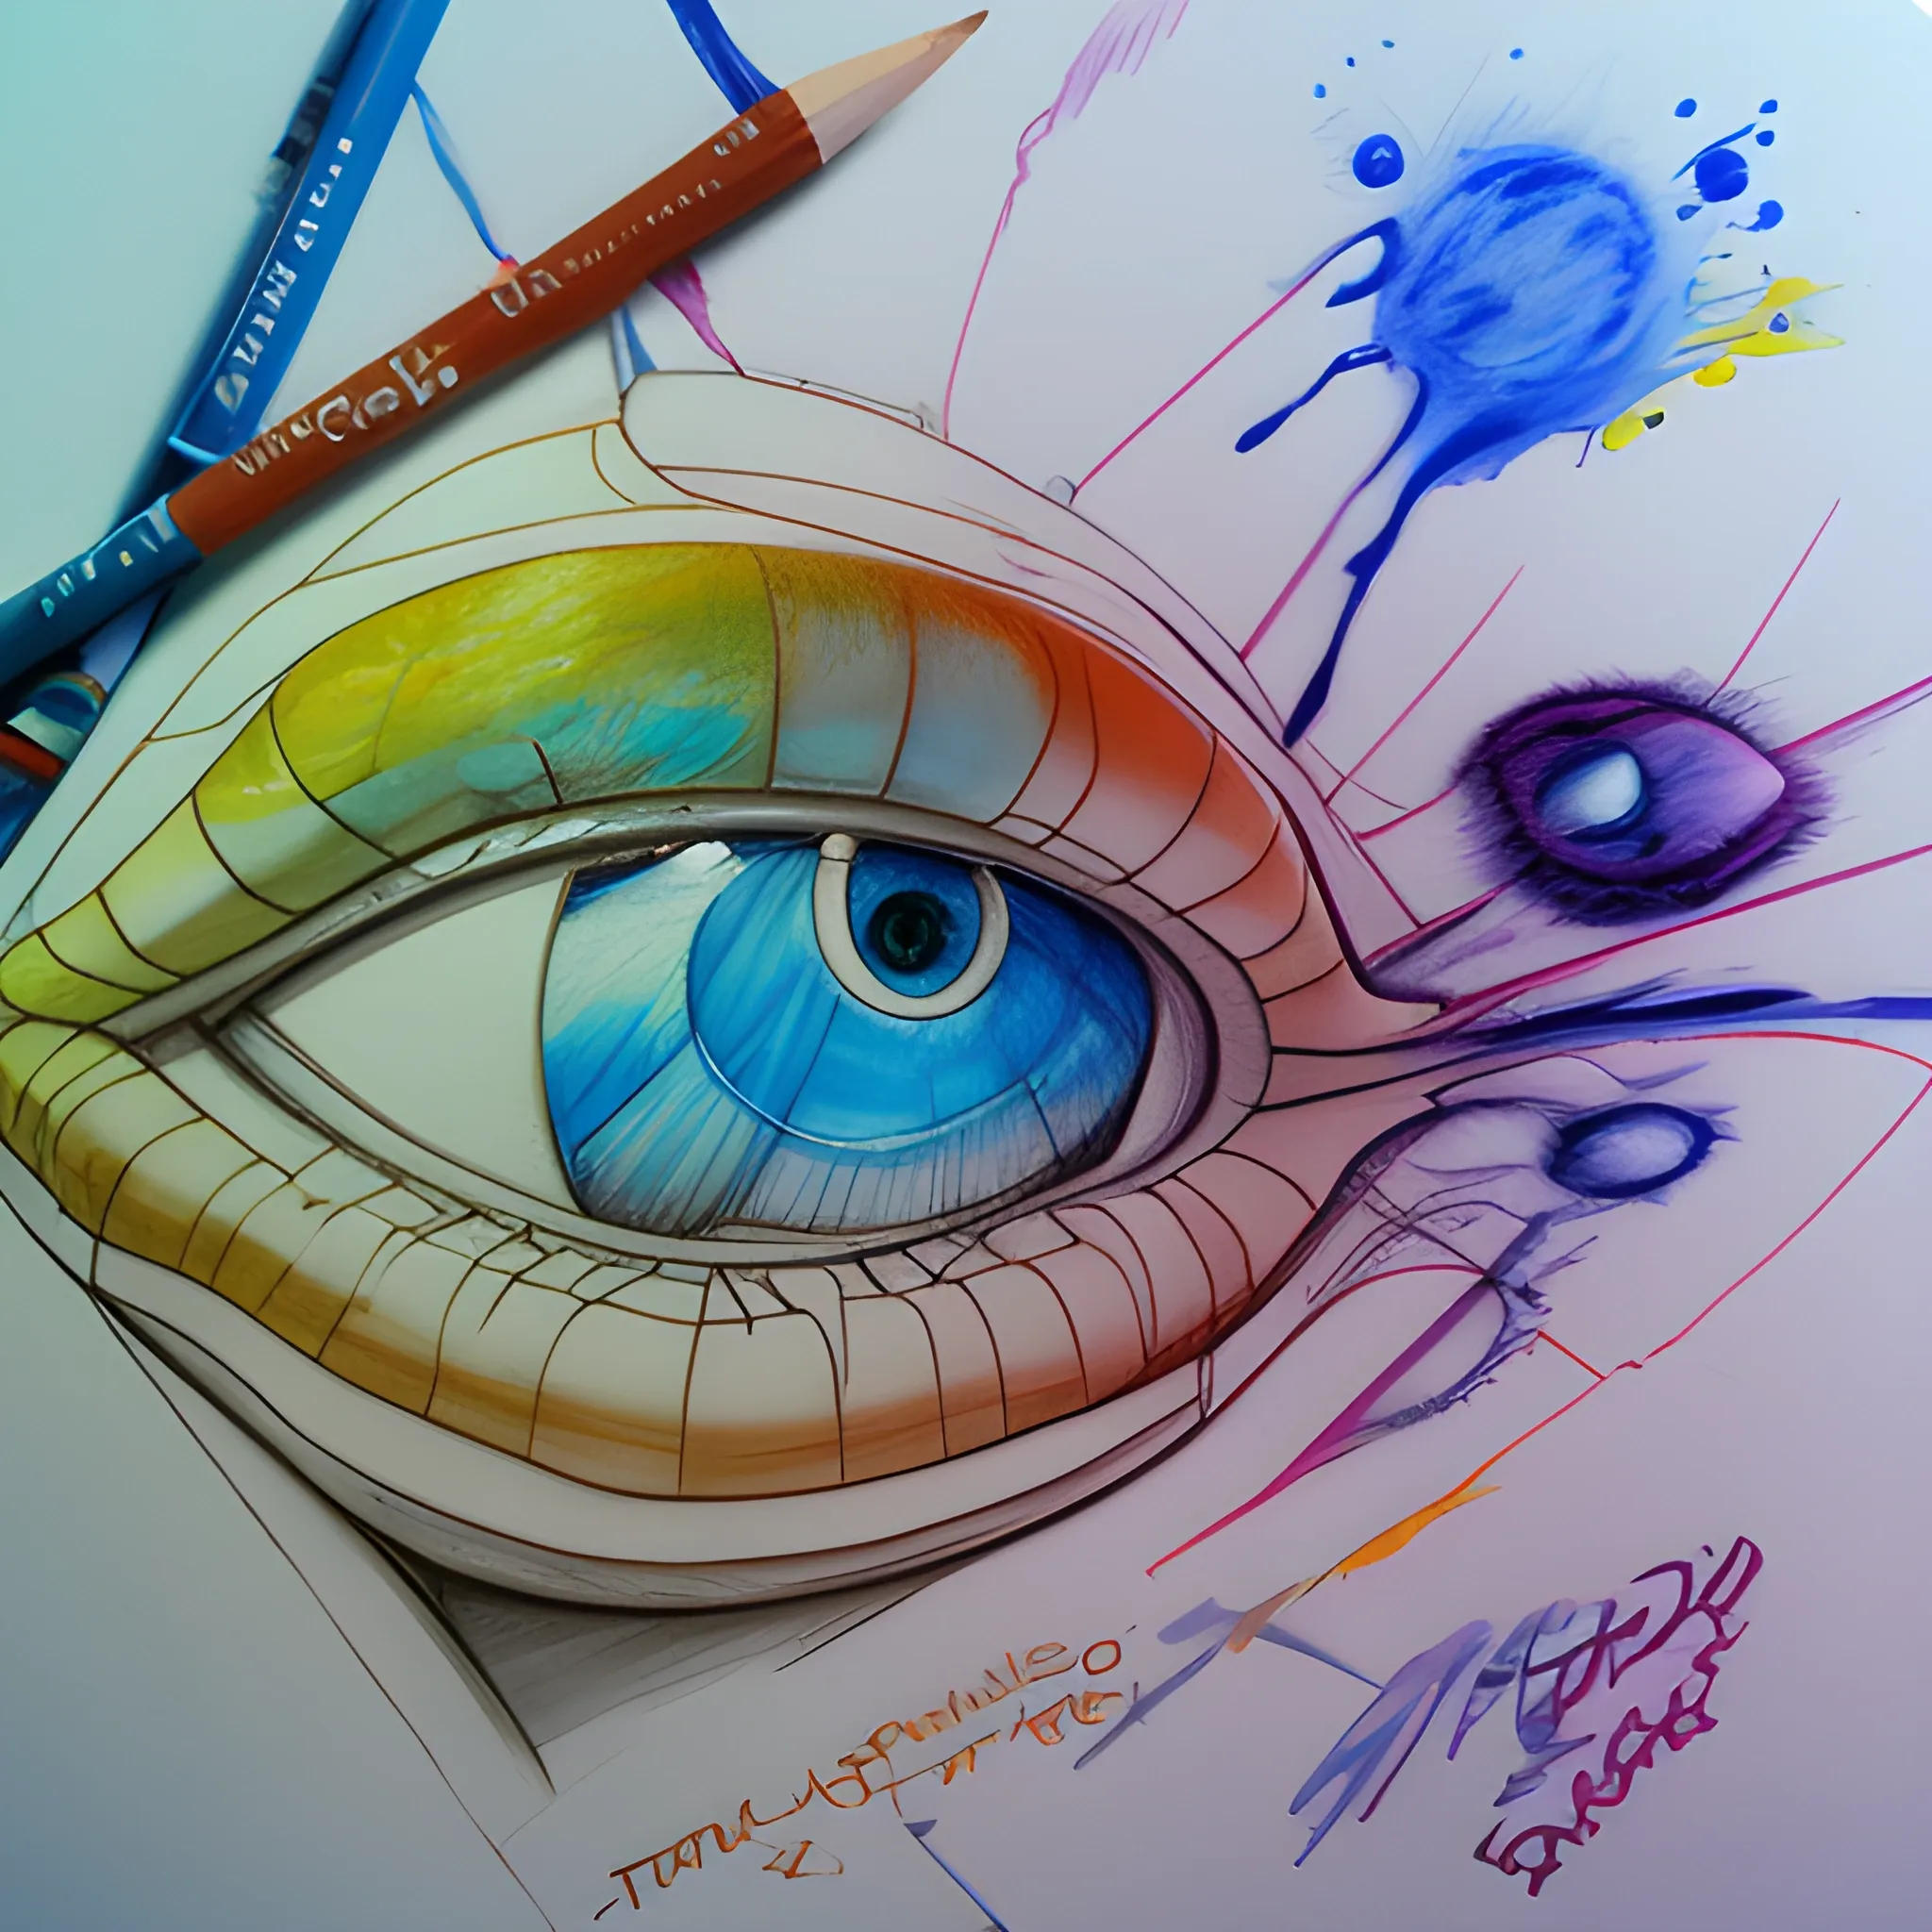 , Trippy, Cartoon, 3D, Pencil Sketch, Oil Painting, Water Color